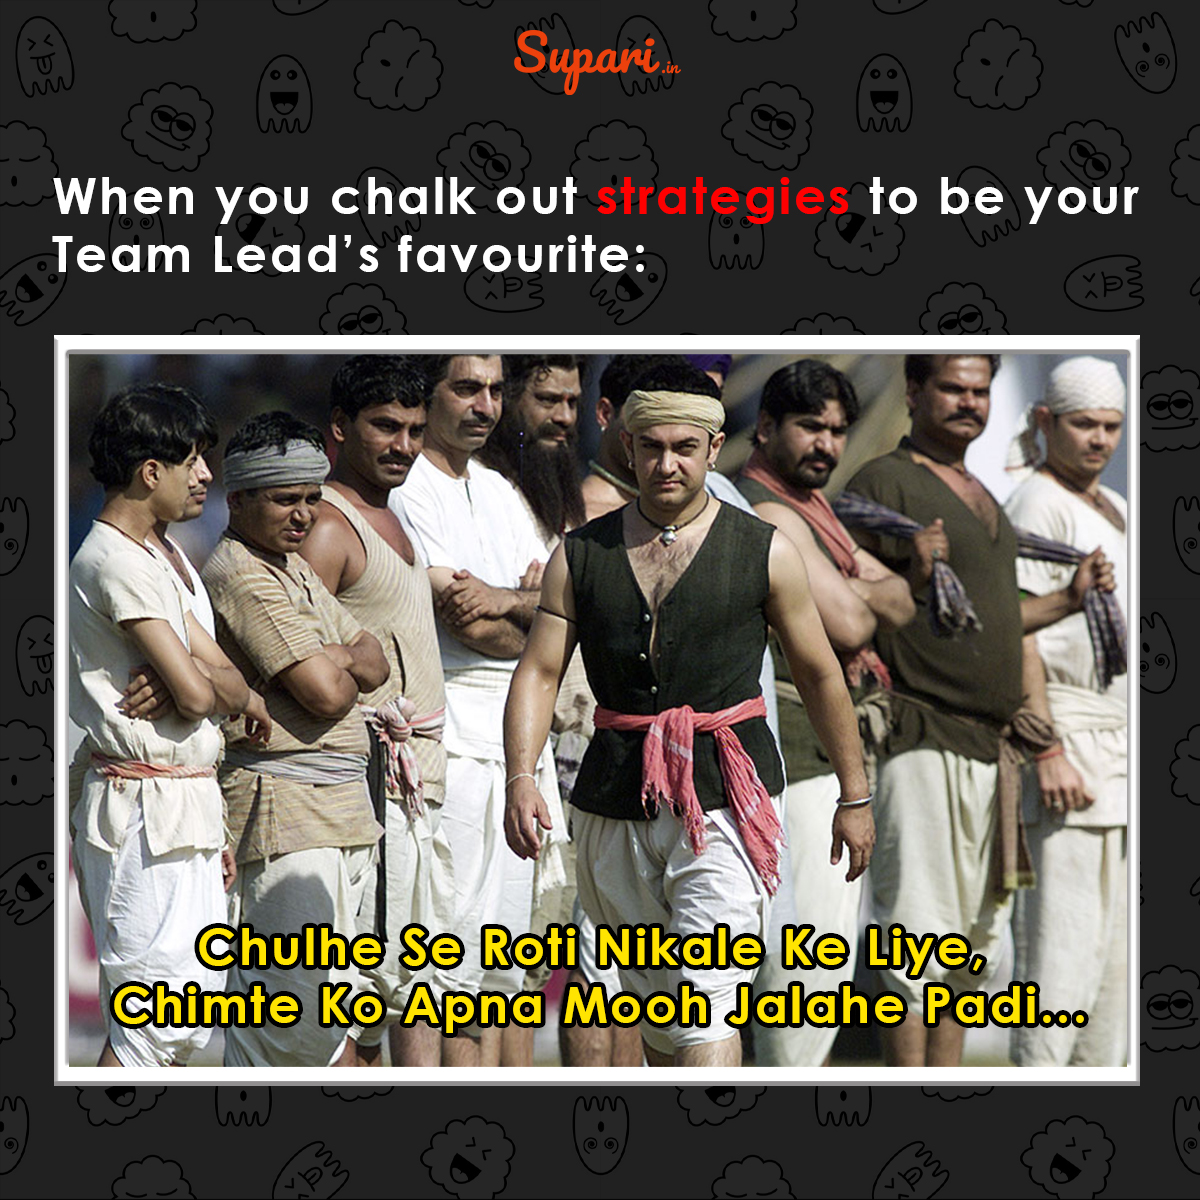 The Over Excited Recognition Hungry Employee’s Tale: Lagaan Style